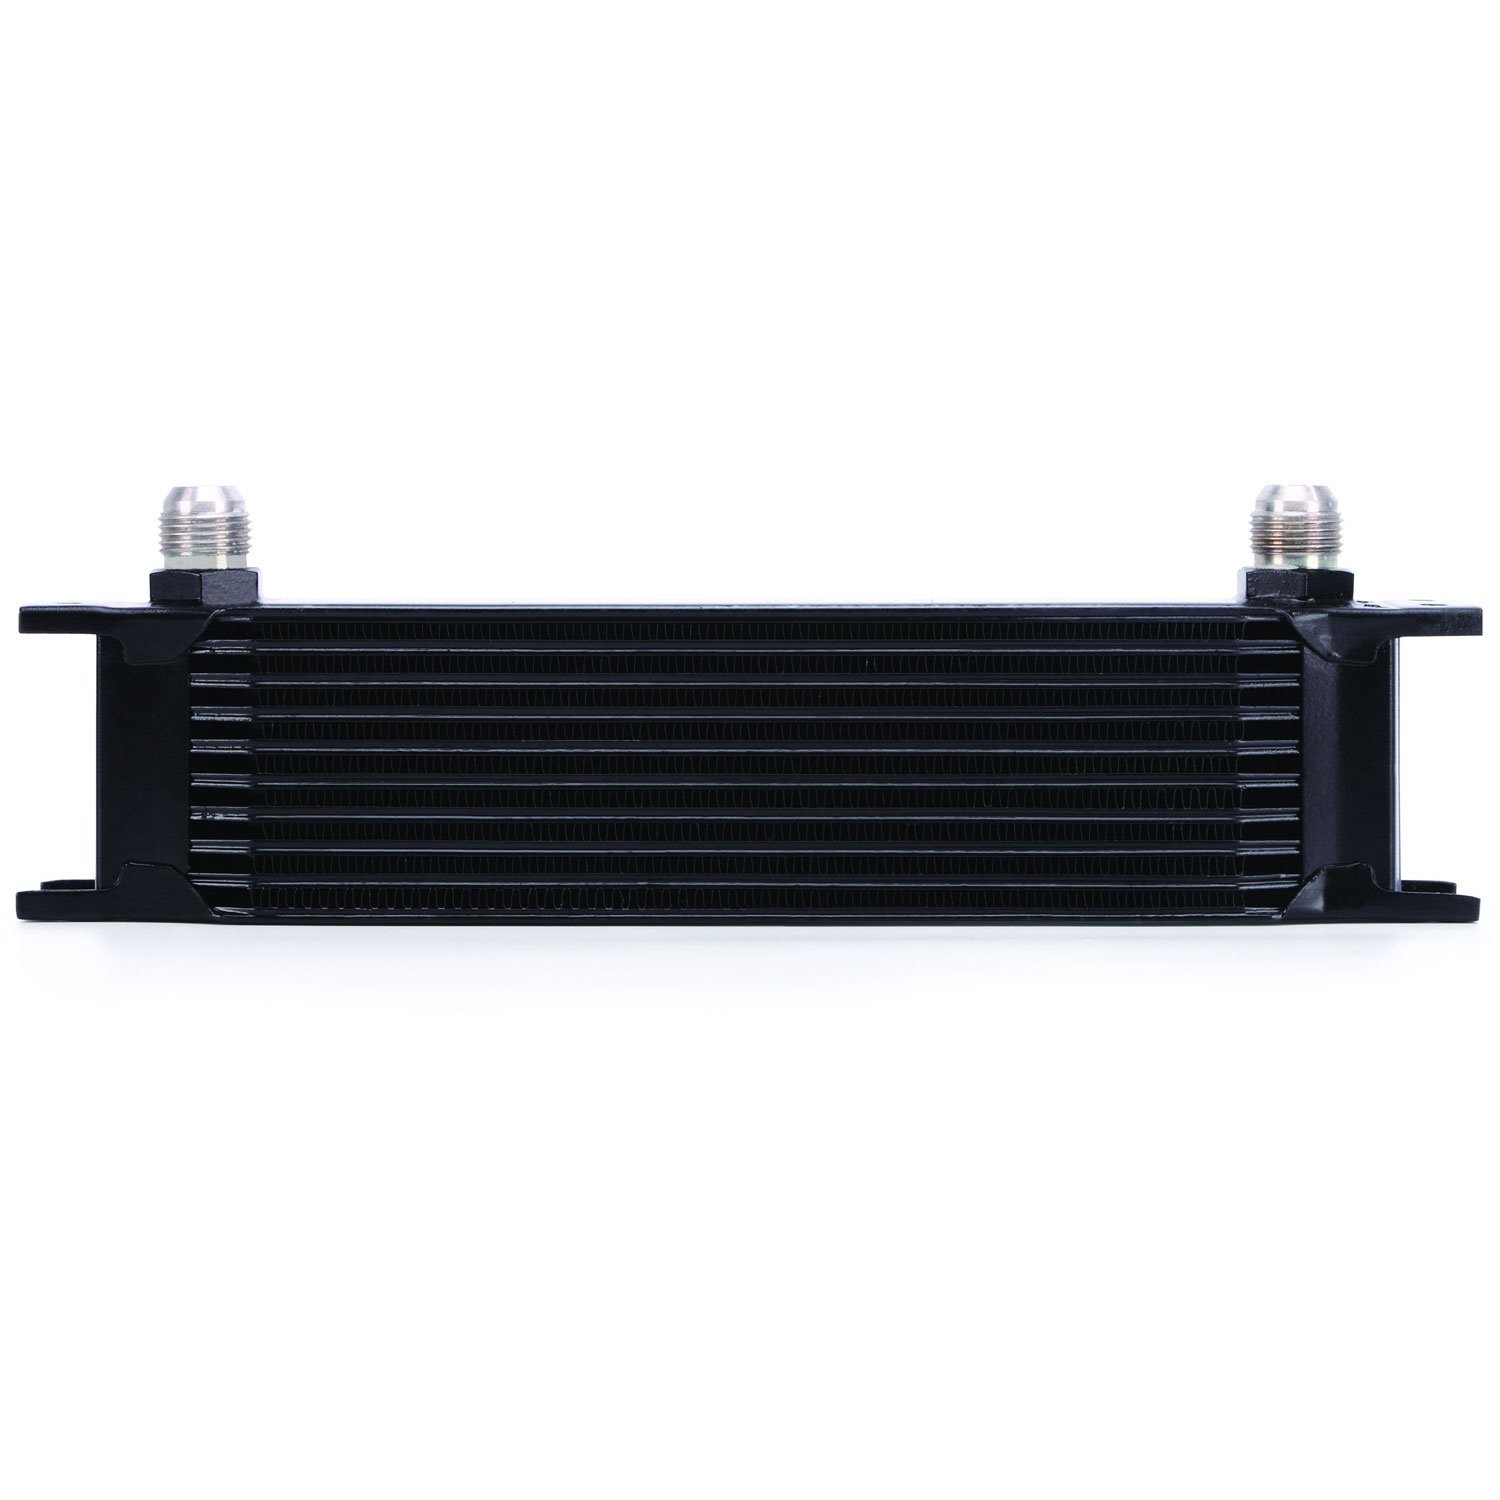 Universal Single Pass Oil Cooler - 10 Rows